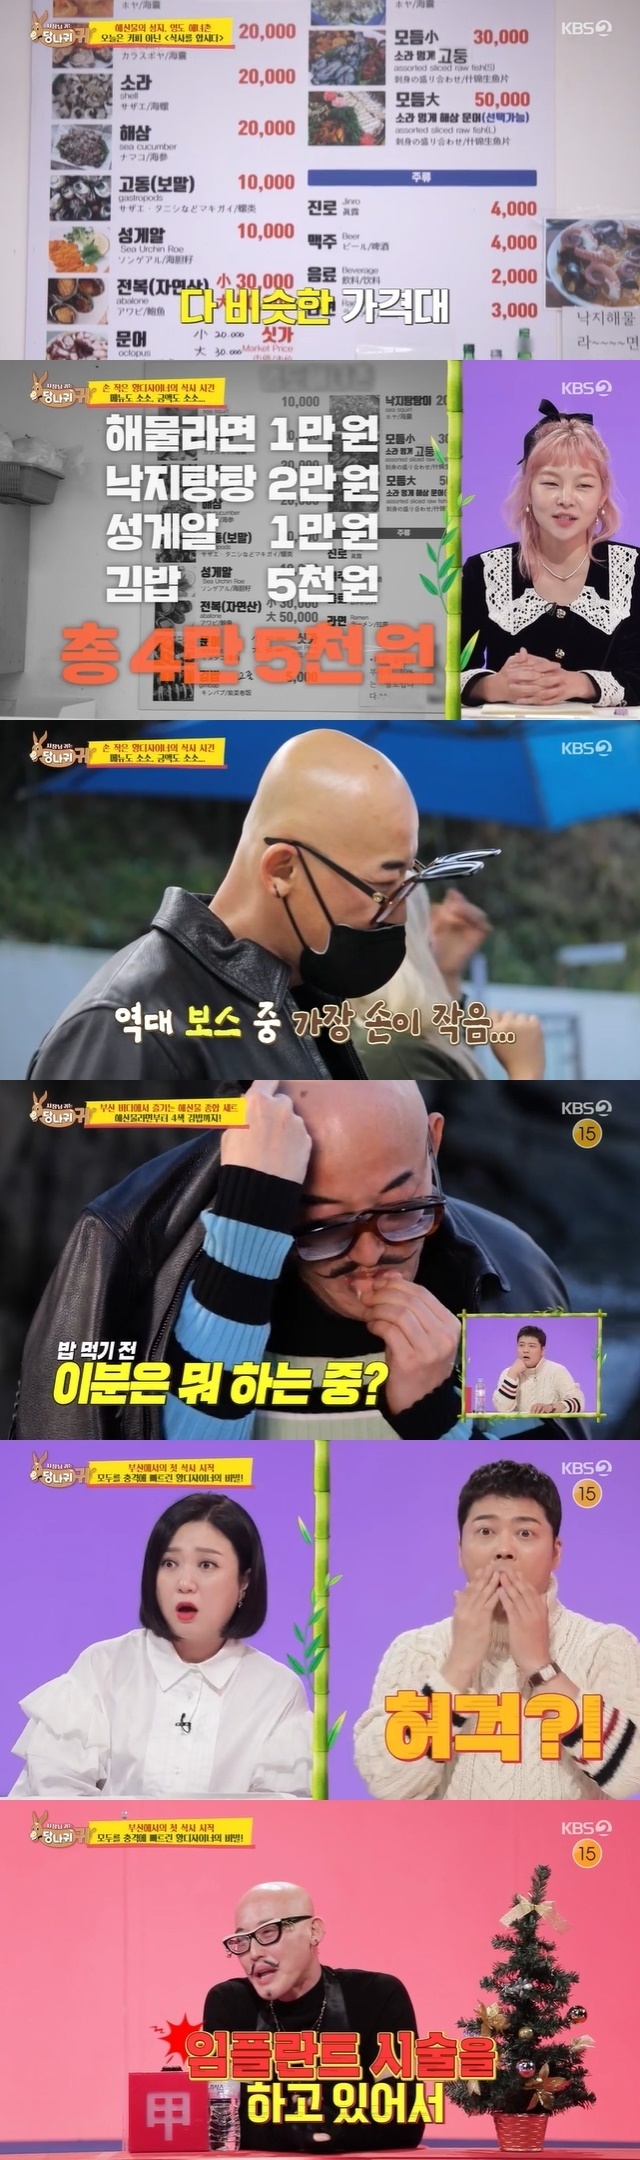 Jun Hyun-moo was surprised by Hwang Jae-geuns appearance of taking out Gorizia before eating.In the 138th KBS 2TV entertainment Boss in the Mirror (hereinafter referred to as The Ass ear) broadcast on January 2, Hwang Jae-geun and his direct One enjoyed a healing trip in Busan.On this day, Hwang Jae-geun went to Busan to eat rice and was at the center of criticism by buying only cheap menus for his own ones.But the mood of the meal turned around. Hwang Jae-geun covered his face with clothes and showed him removing Gorizia. Jun Hyun-moo said, What is denture?I was surprised, and Hwang Jae-geun explained, I was doing implant surgery at that time. Jun Hyun-moo said, I was so surprised when I heard the explanation, and I could not hide my embarrassment.